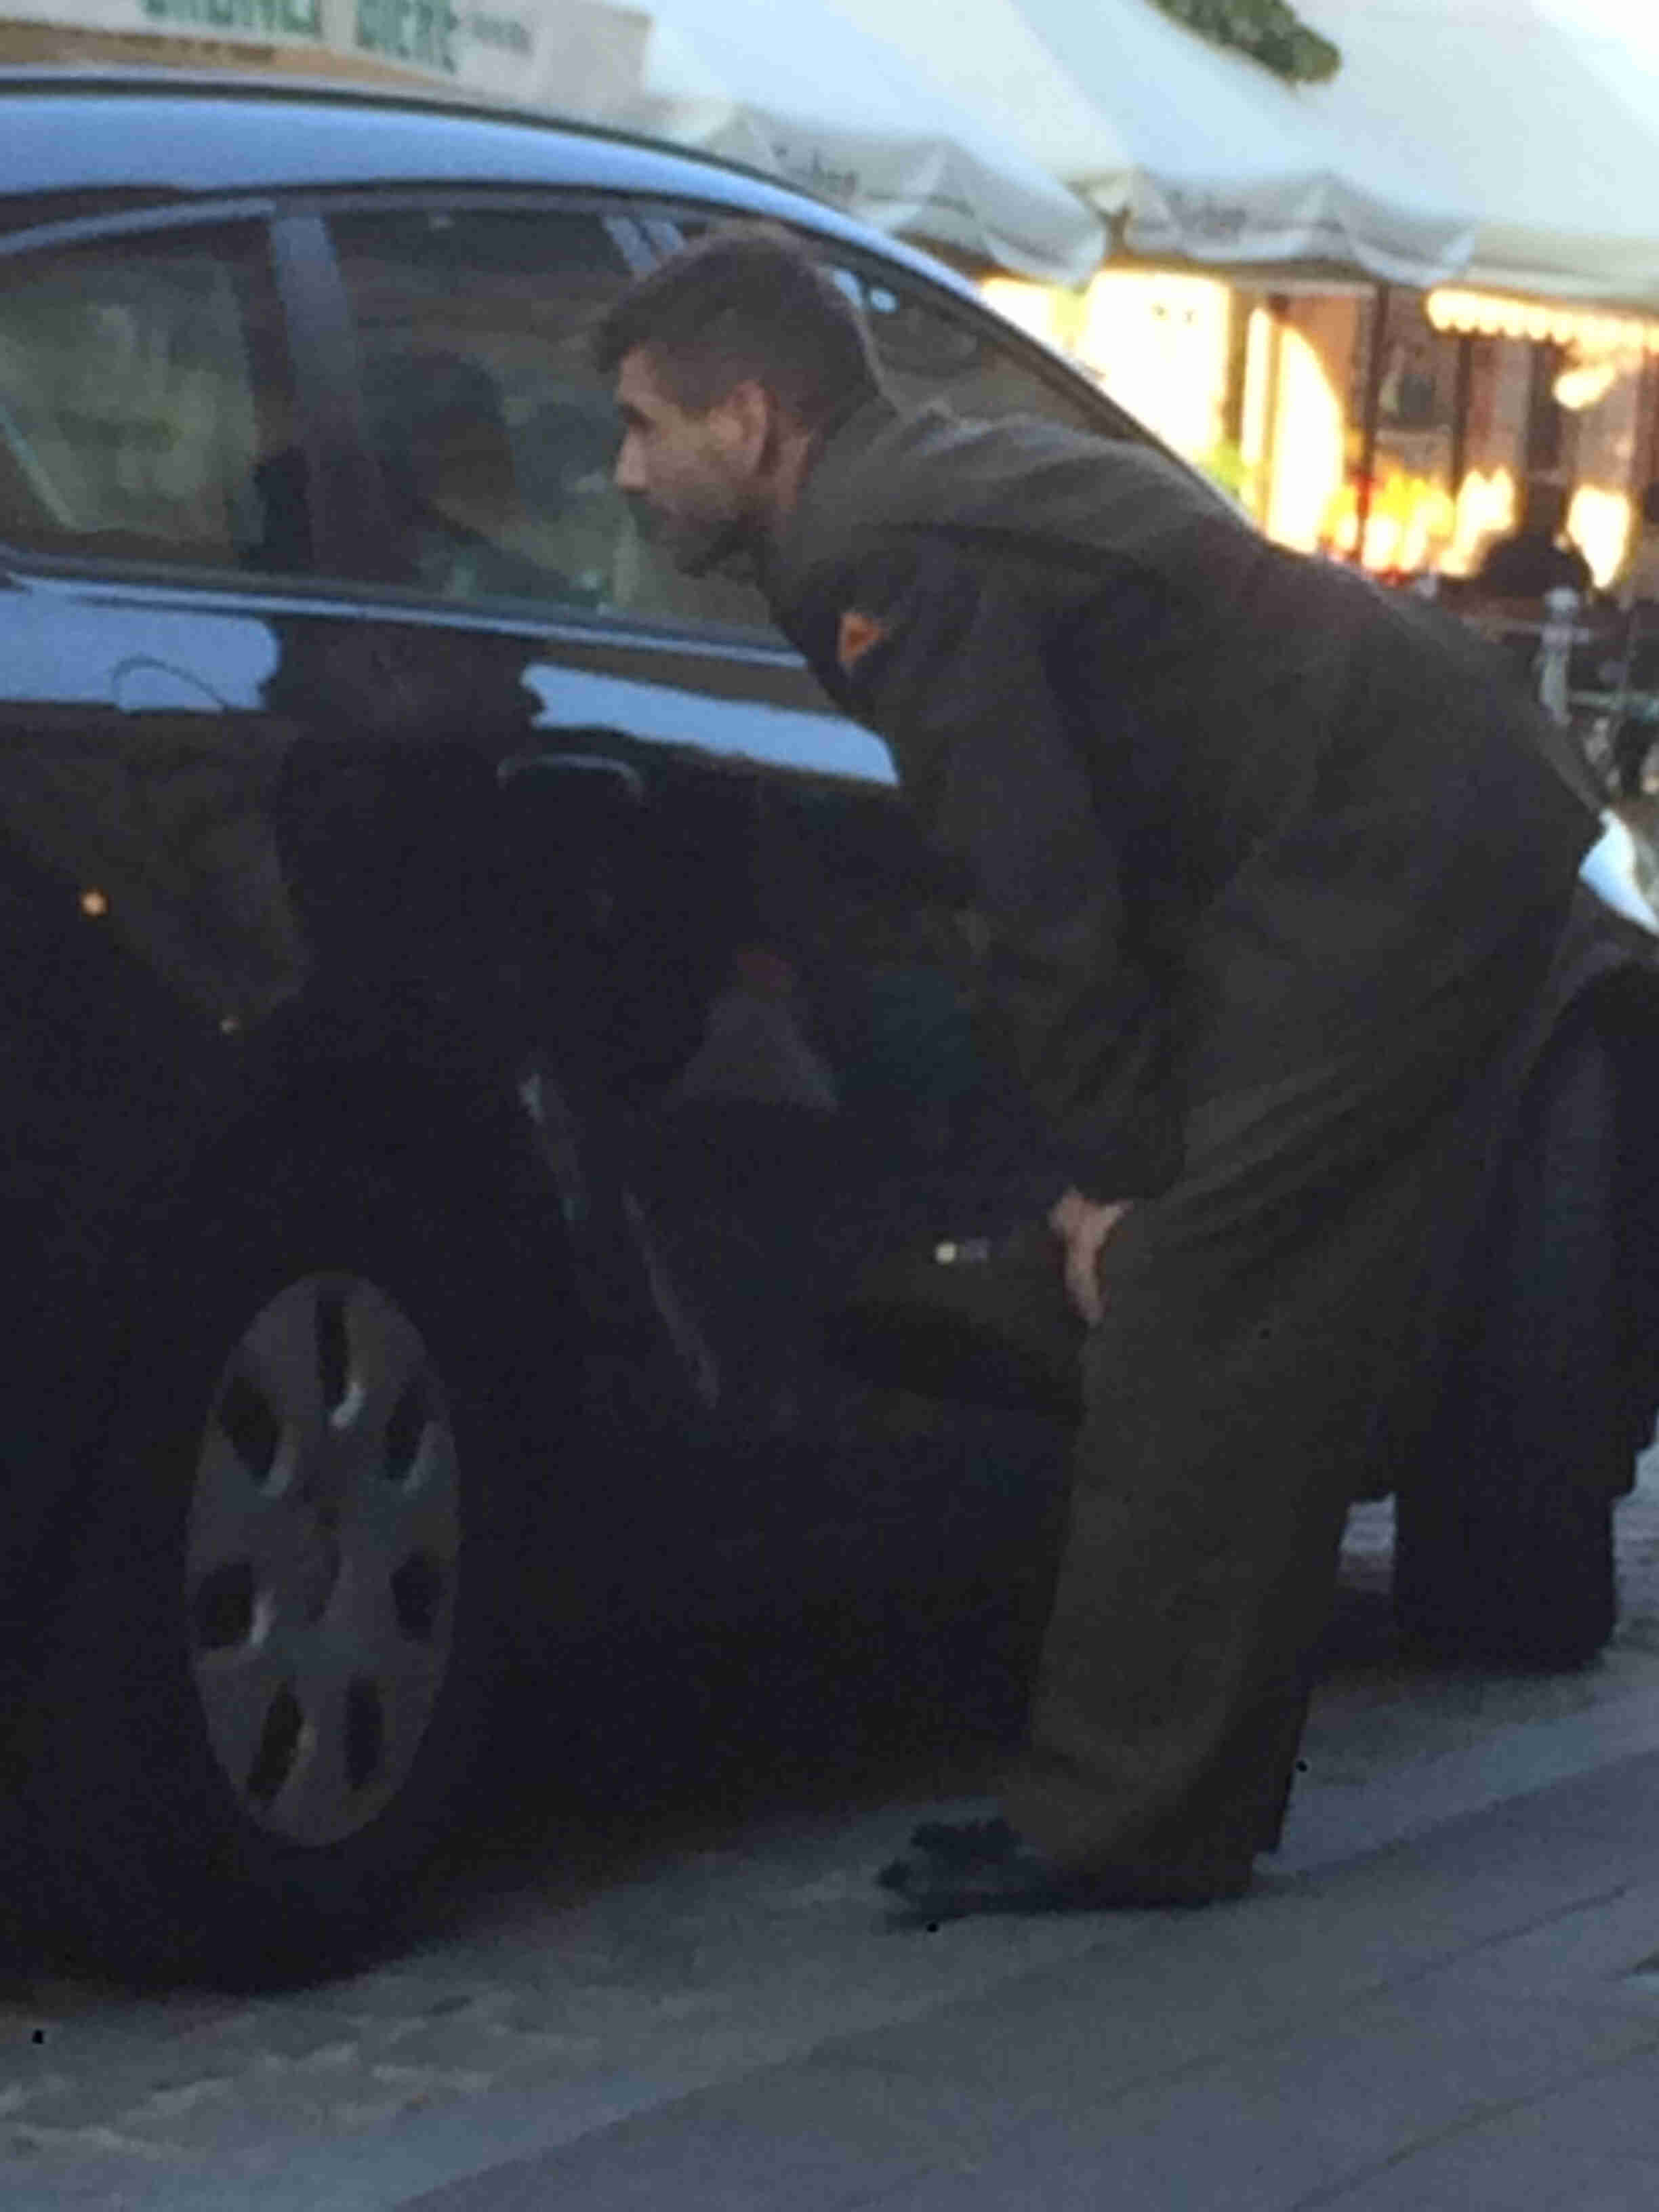 Left side view of a soldier, standing on a sidewalk leaning over, peeking through the rear right window of a black car